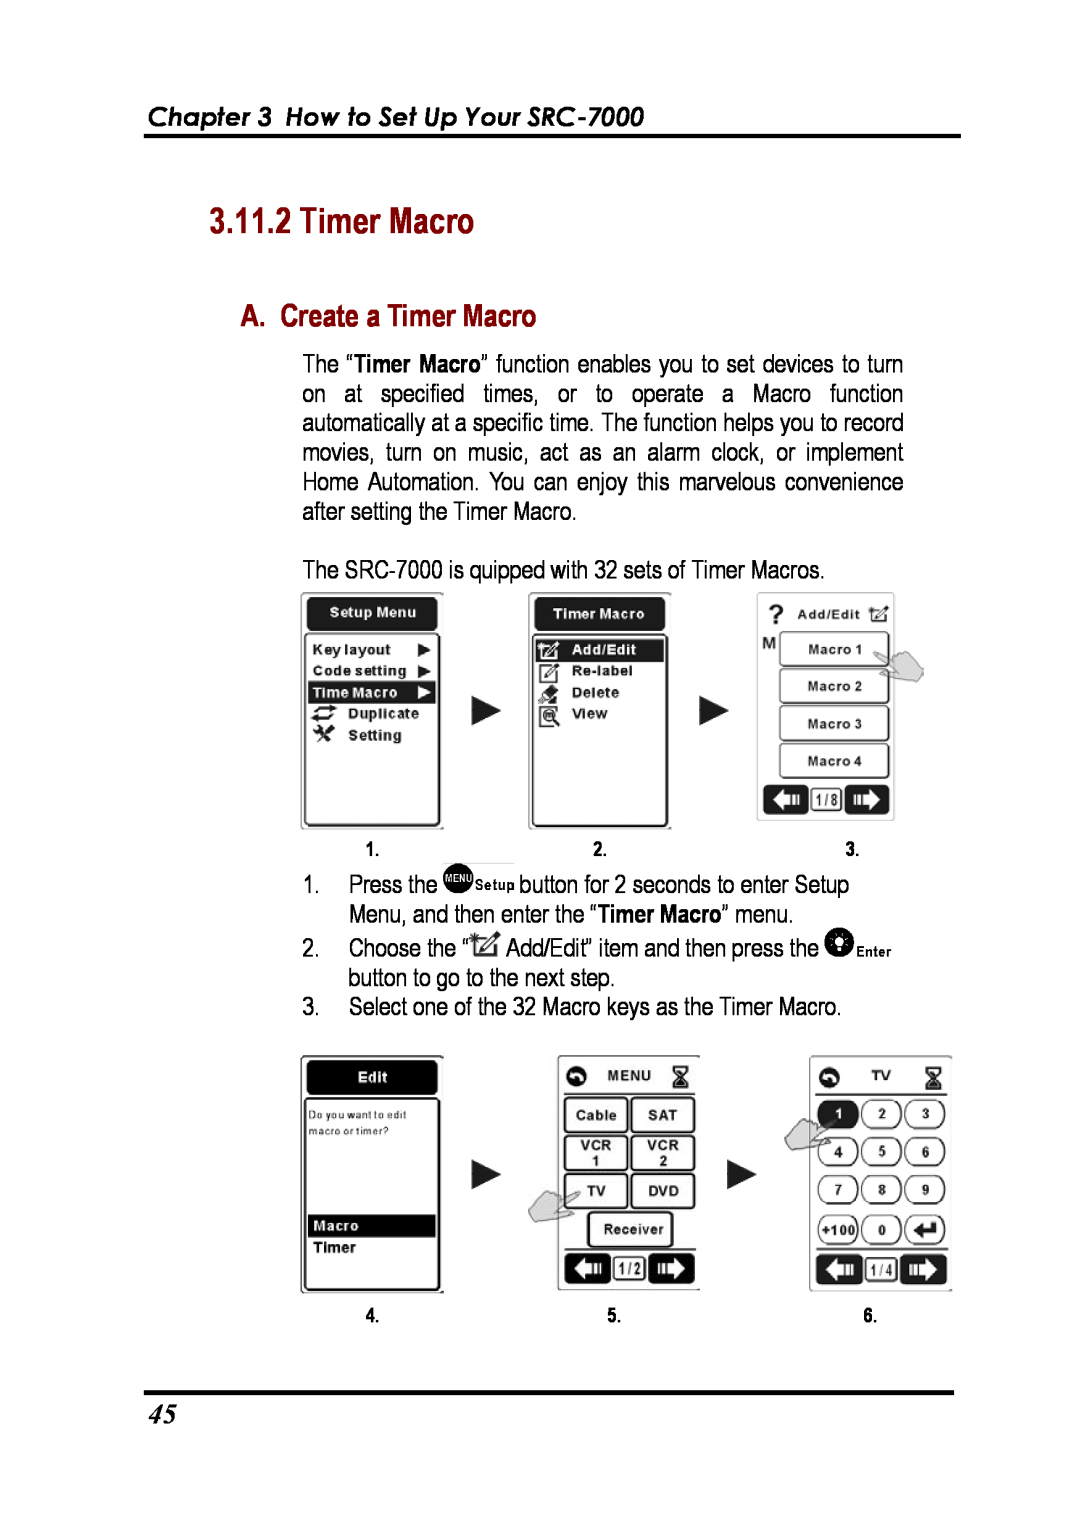 Sunwave Tech manual A. Create a Timer Macro, How to Set Up Your SRC-7000 